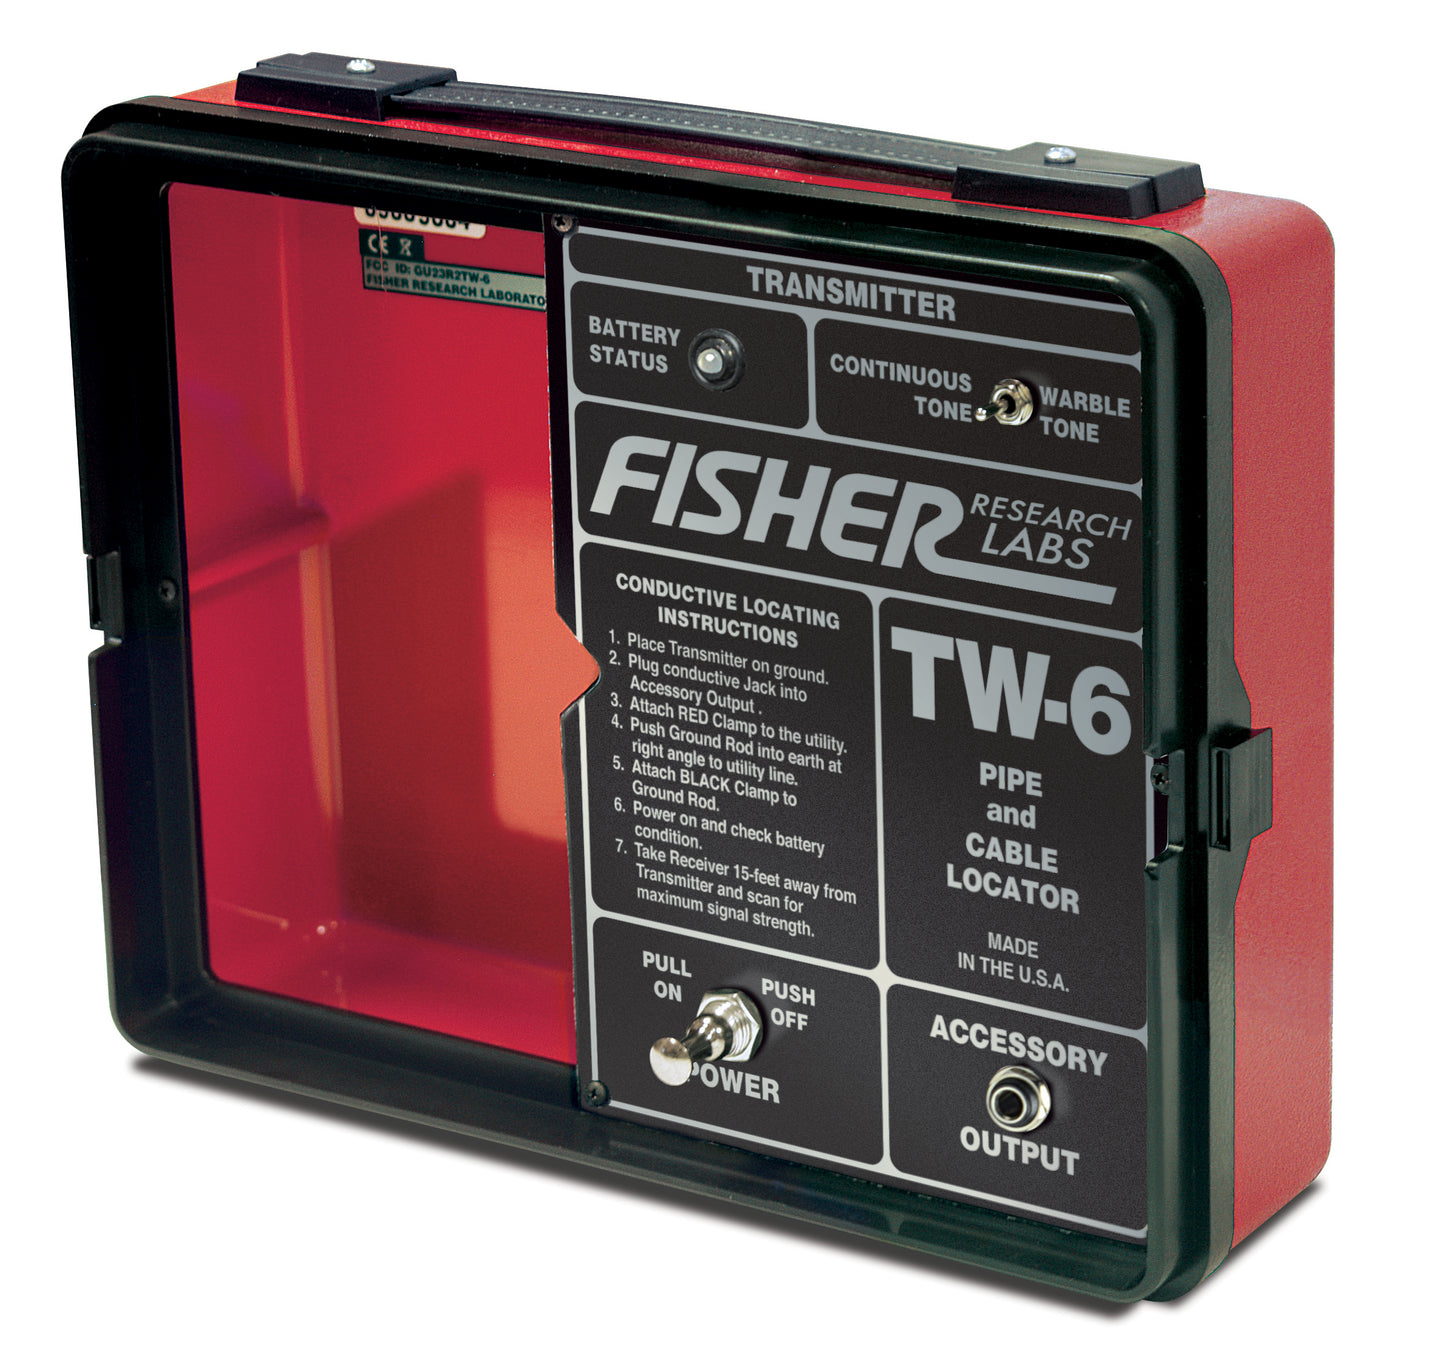 Fisher TW6 Split Box Pipe & Cable Locator